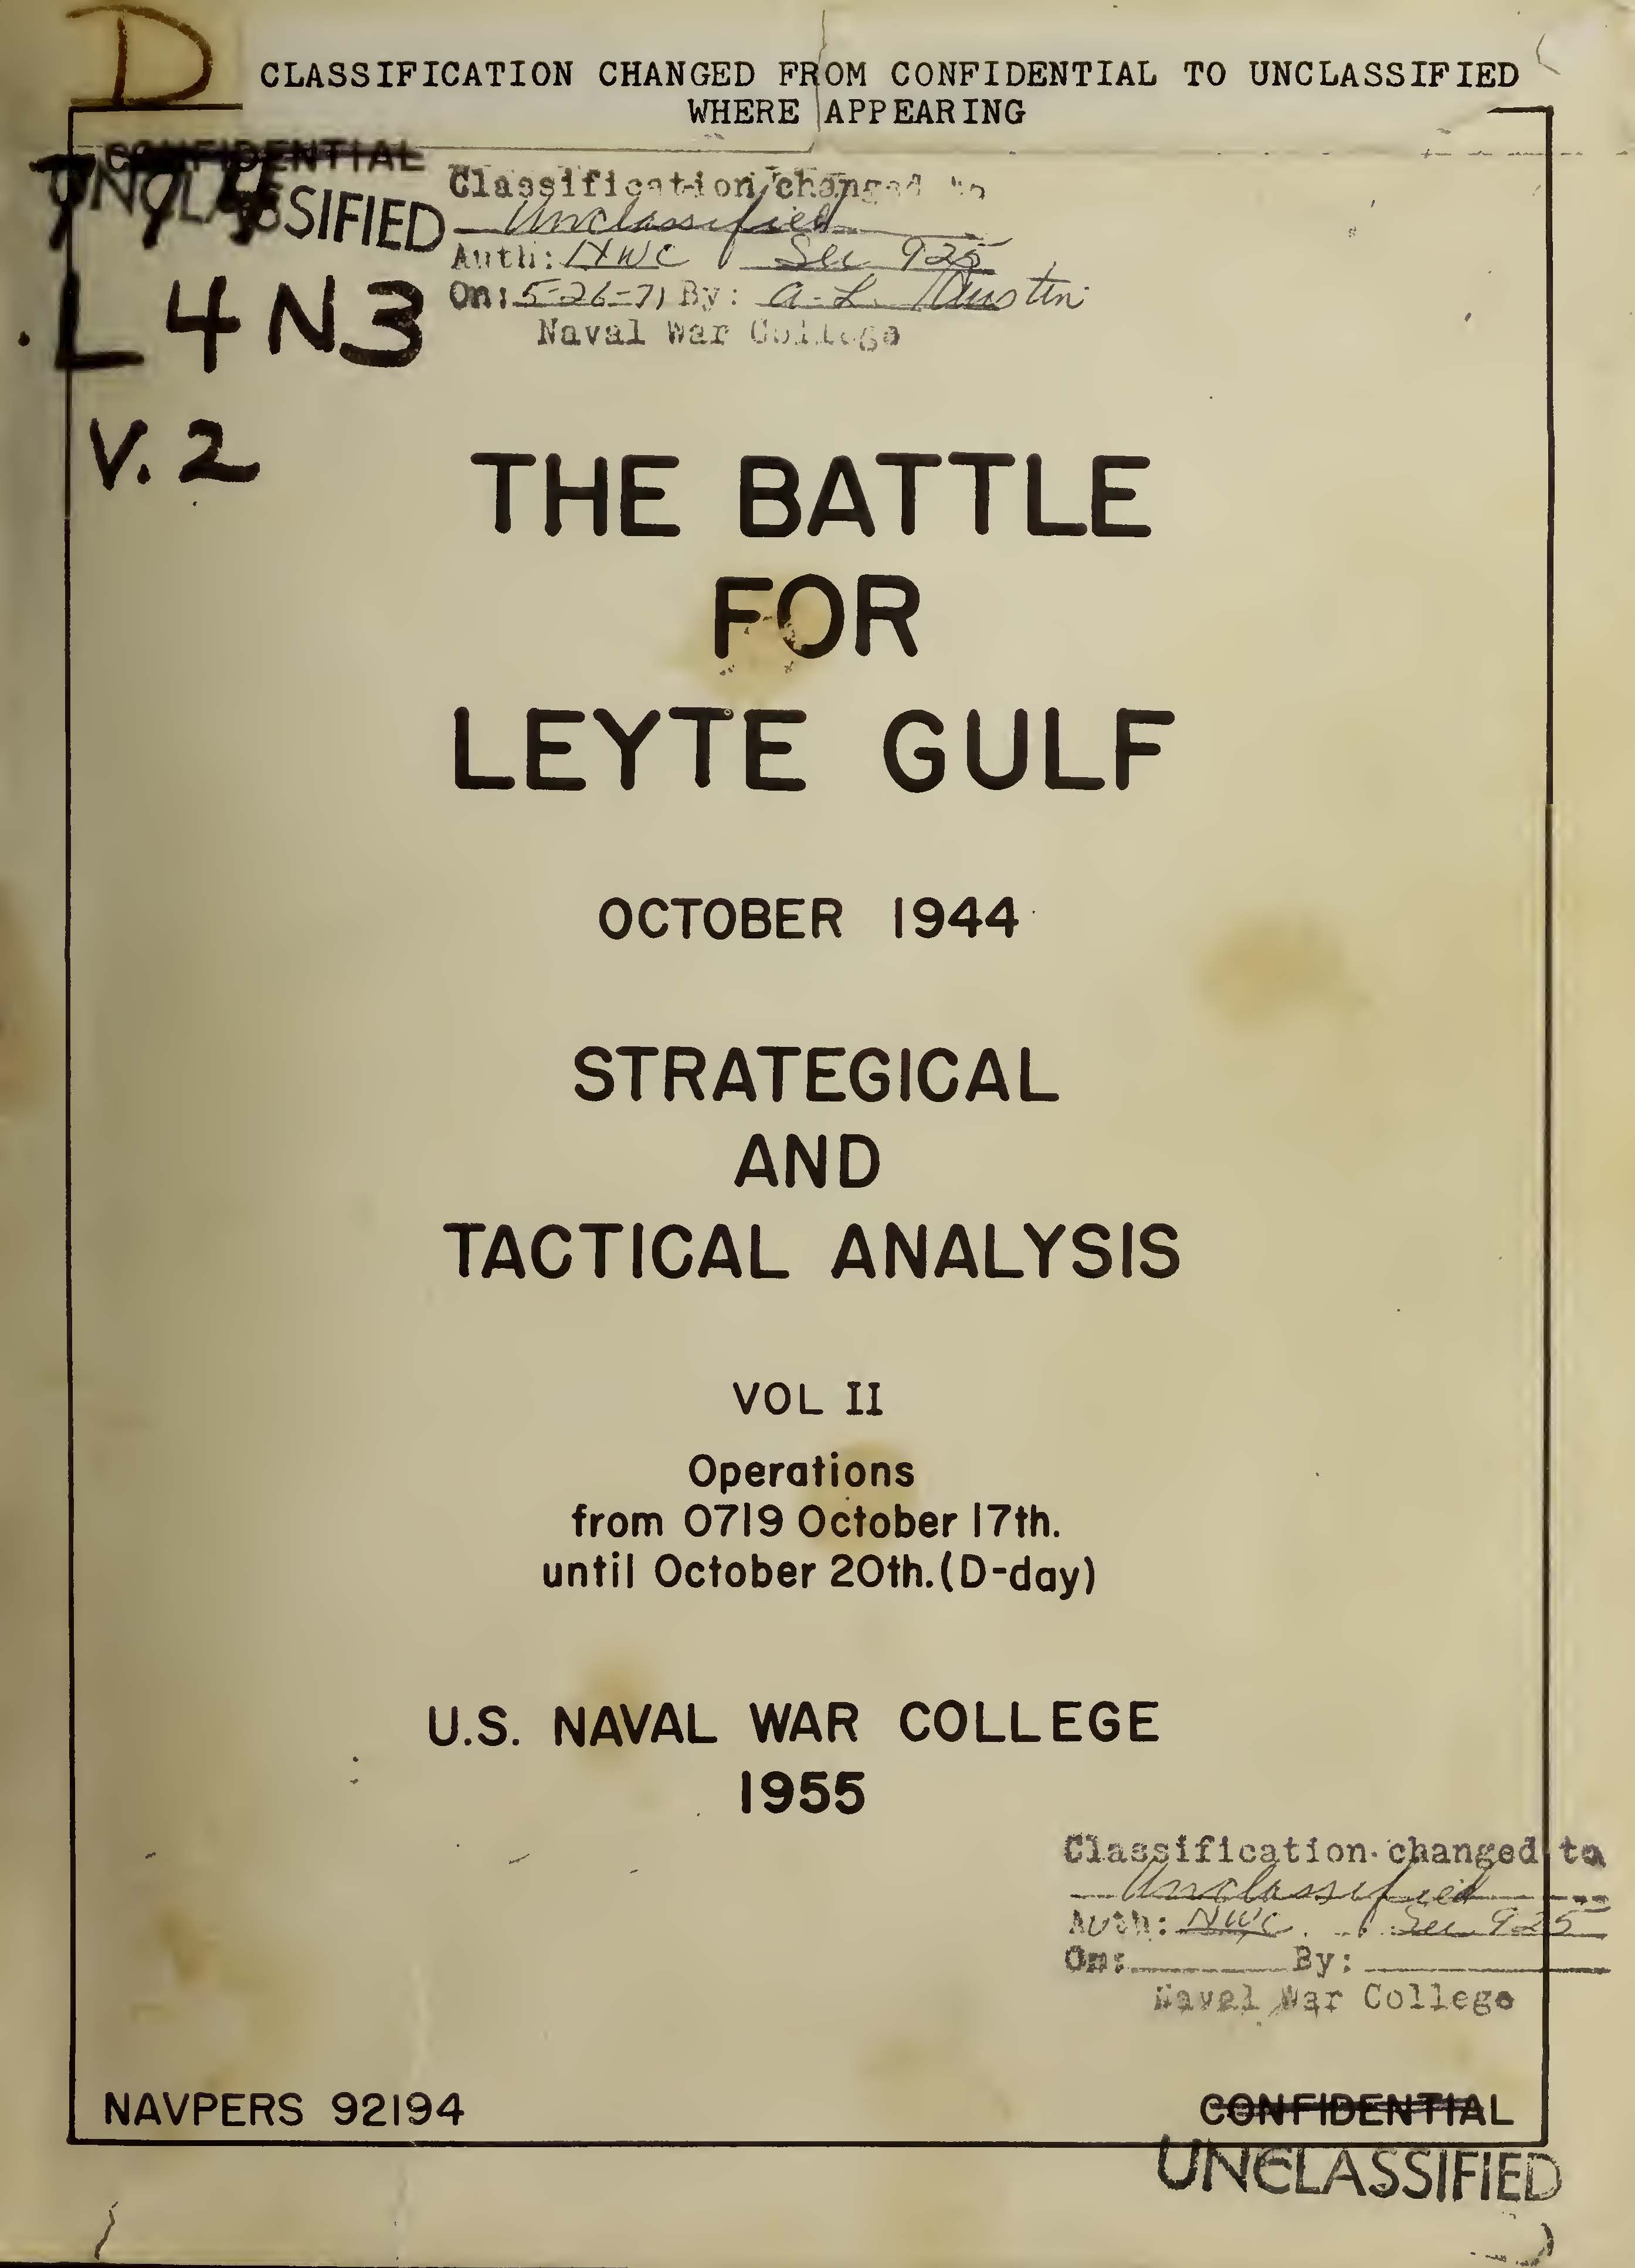 Battle for Leyte Gulf, October 1944: Strategical and Tactical Analysis. Volume II, 1955